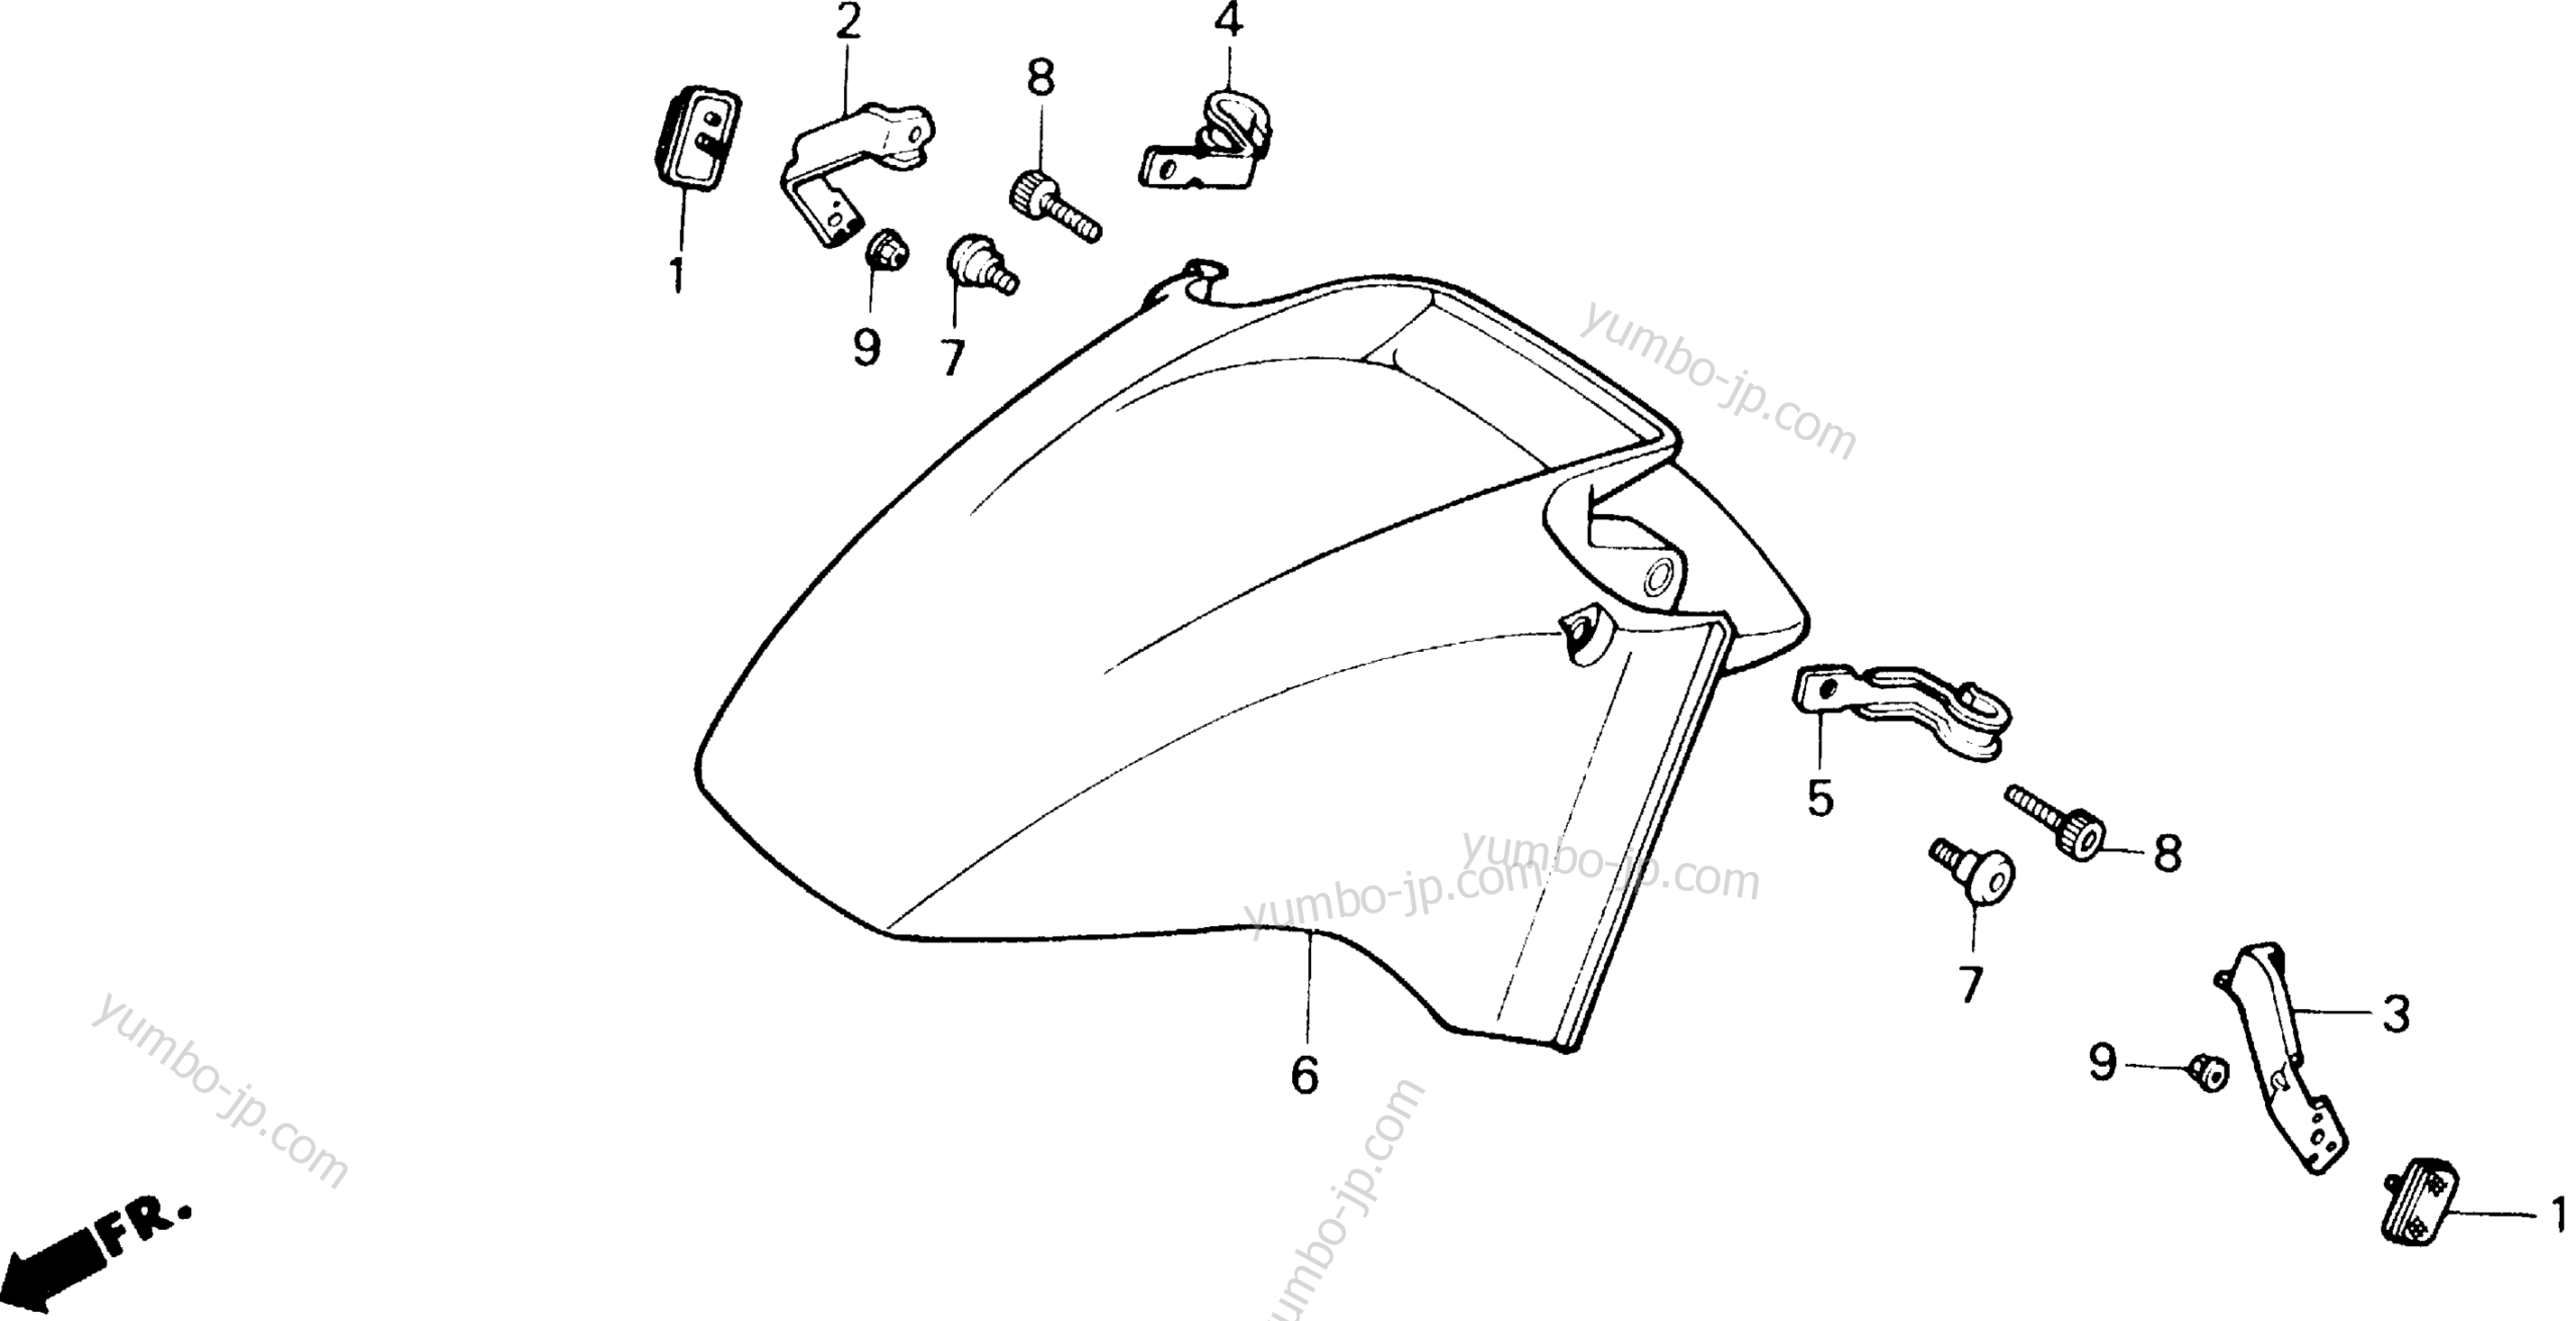 FRONT FENDER for motorcycles HONDA VFR700F A 1986 year